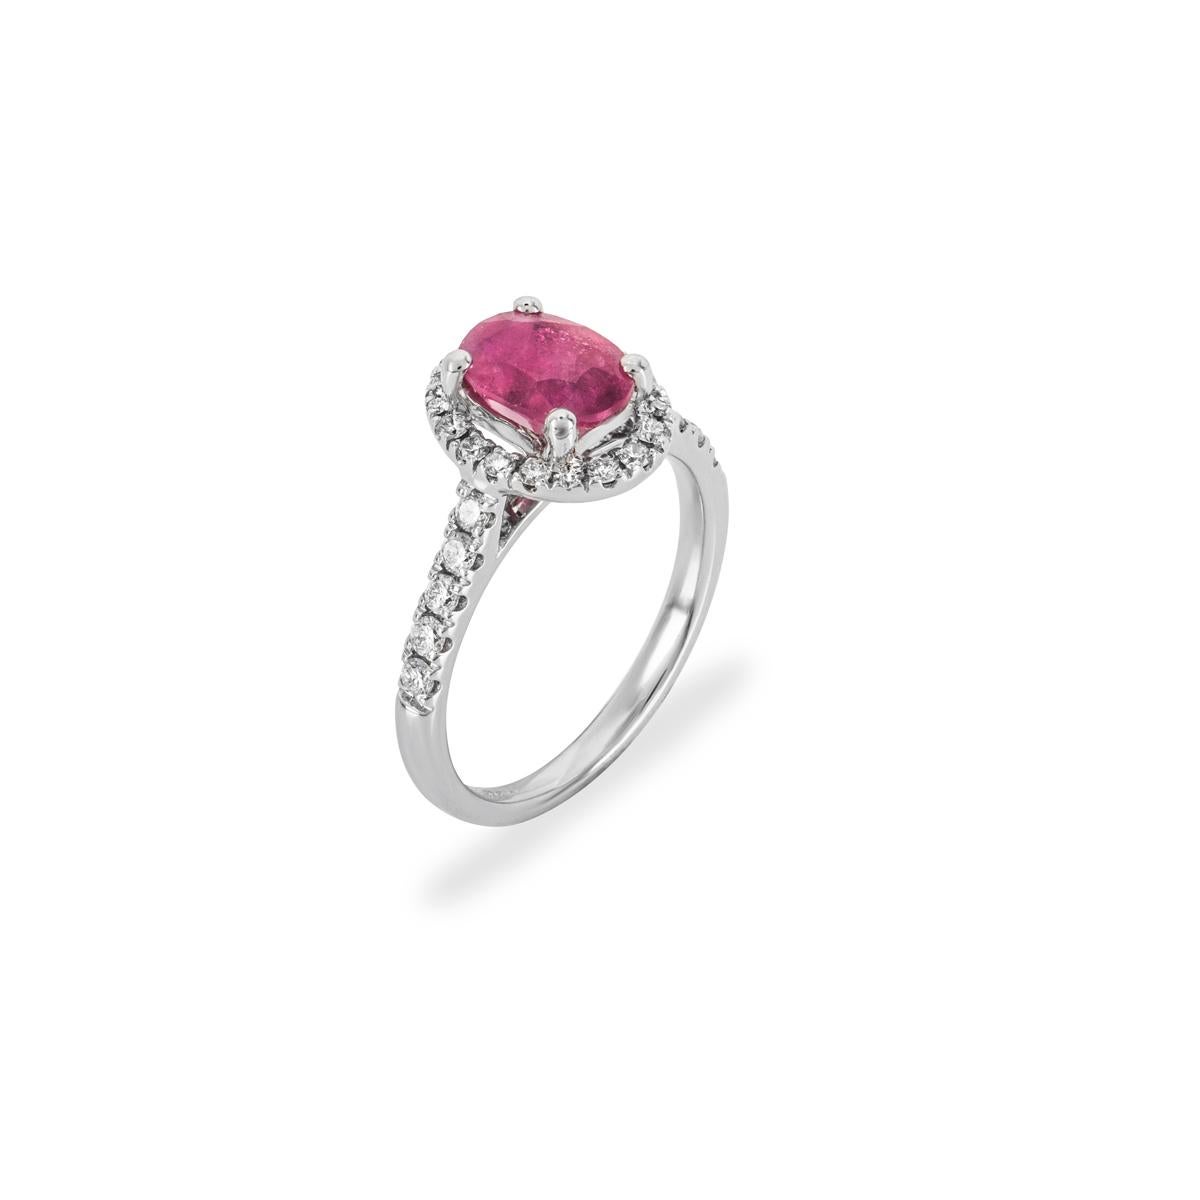 A beautiful 18k white gold ruby and diamond halo ring. The ring is set to the centre with an oval cut ruby weighing approximately 1.28ct, with a milky red hue throughout. Further complementing the ruby are 28 round brilliant cut diamonds pave set to